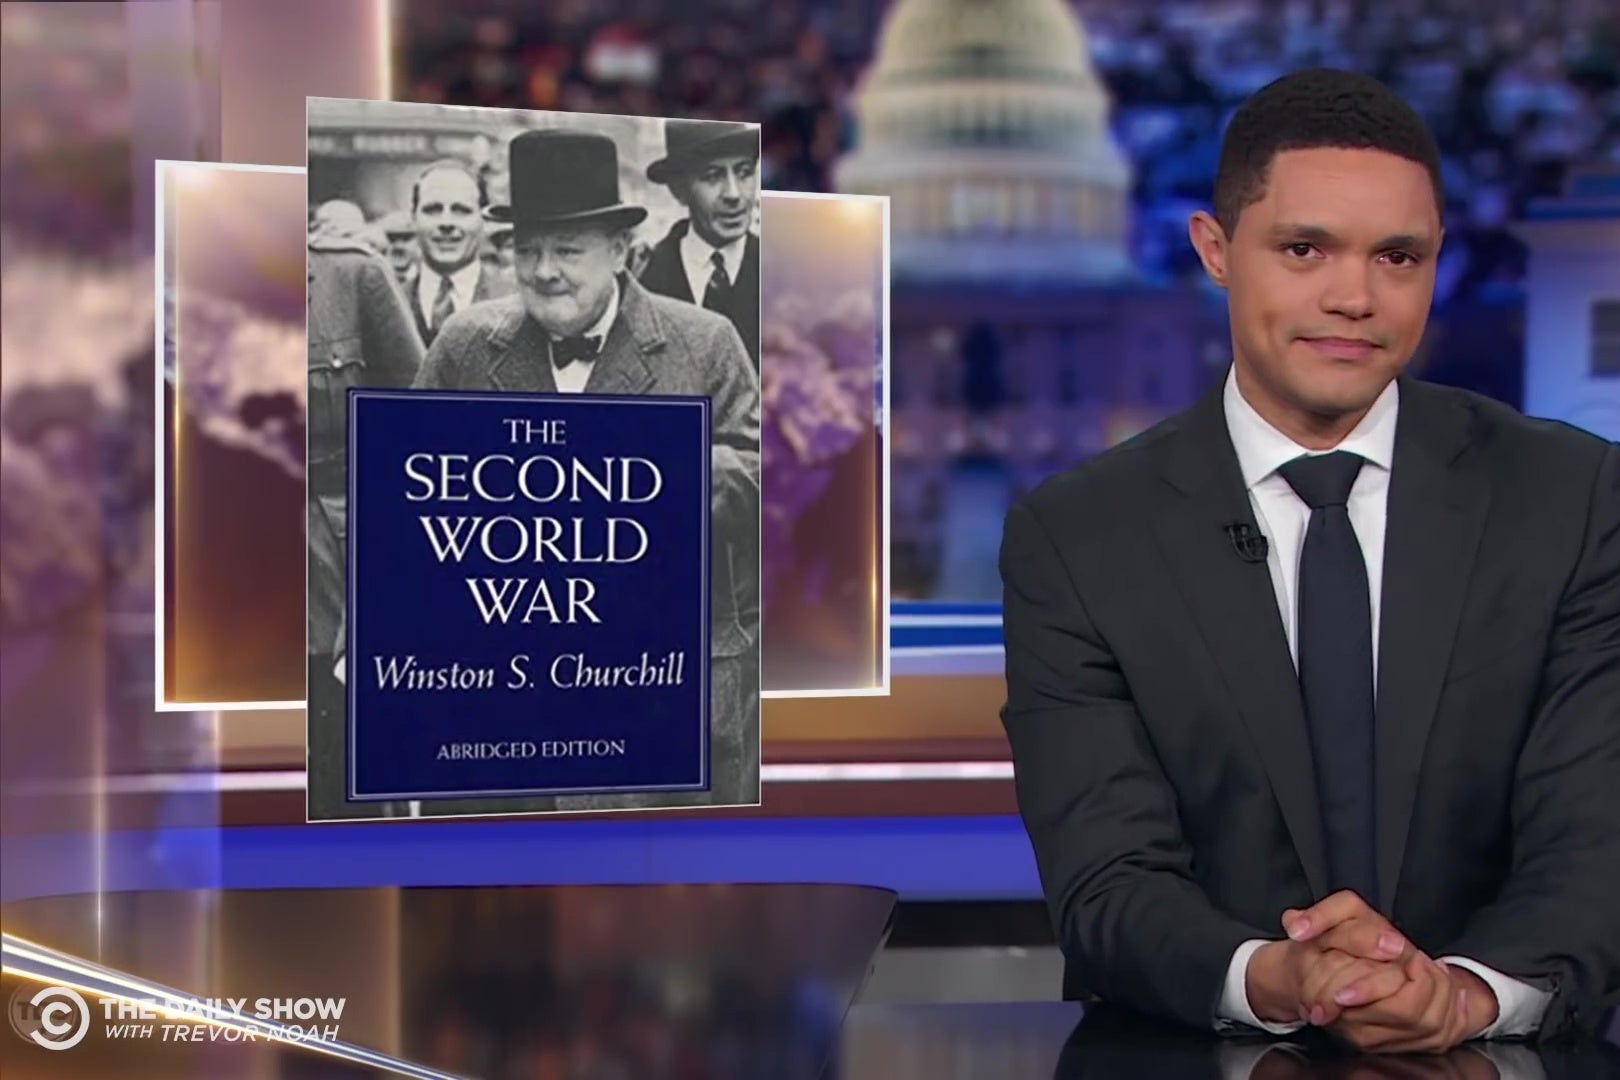 Trevor Noah looks skeptical in front of a picture of The Second World War.